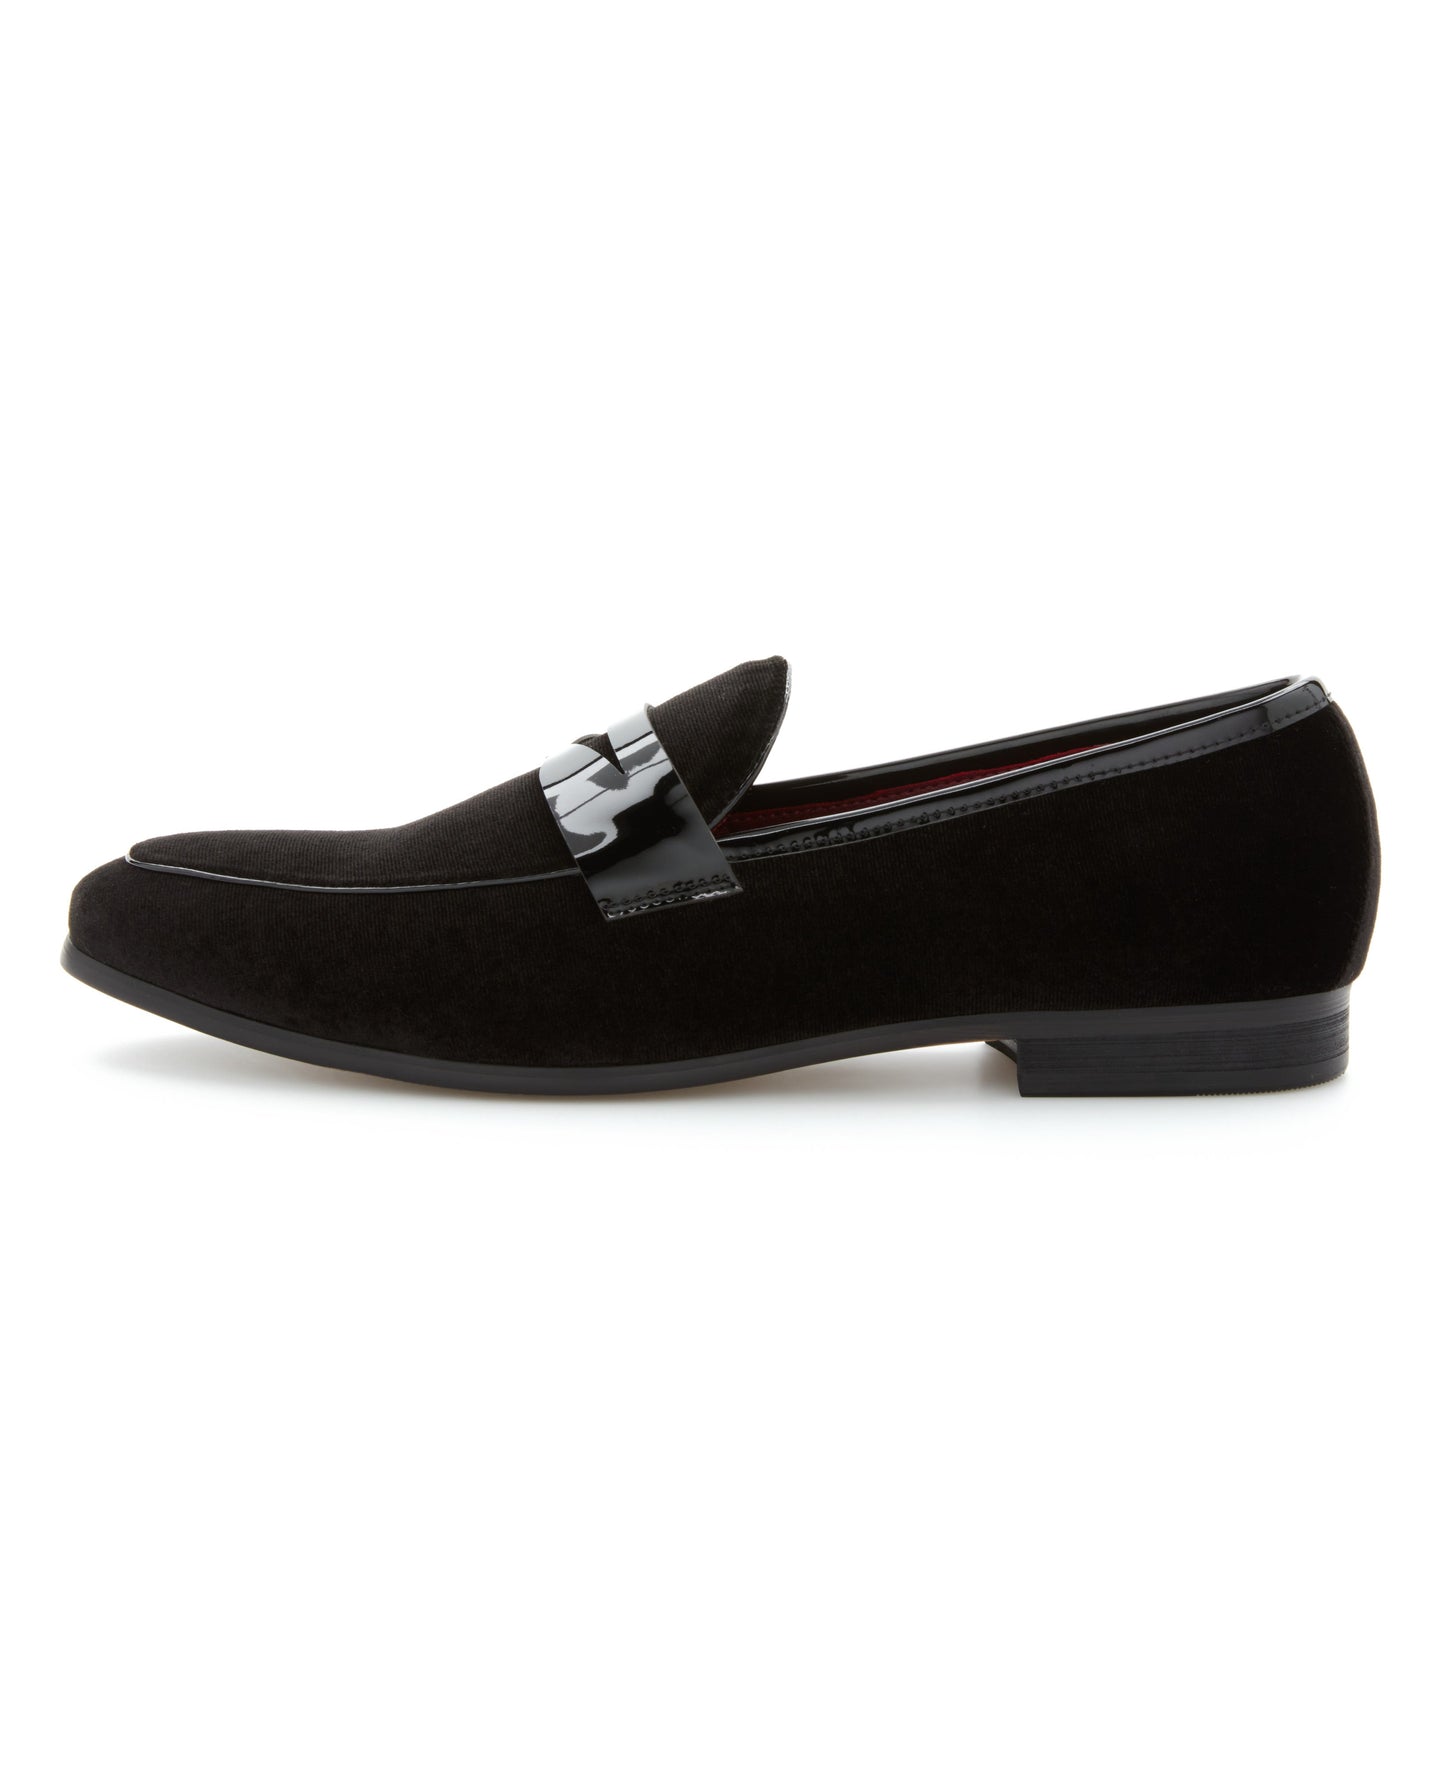 Genuine Suede Leather Penny Loafers